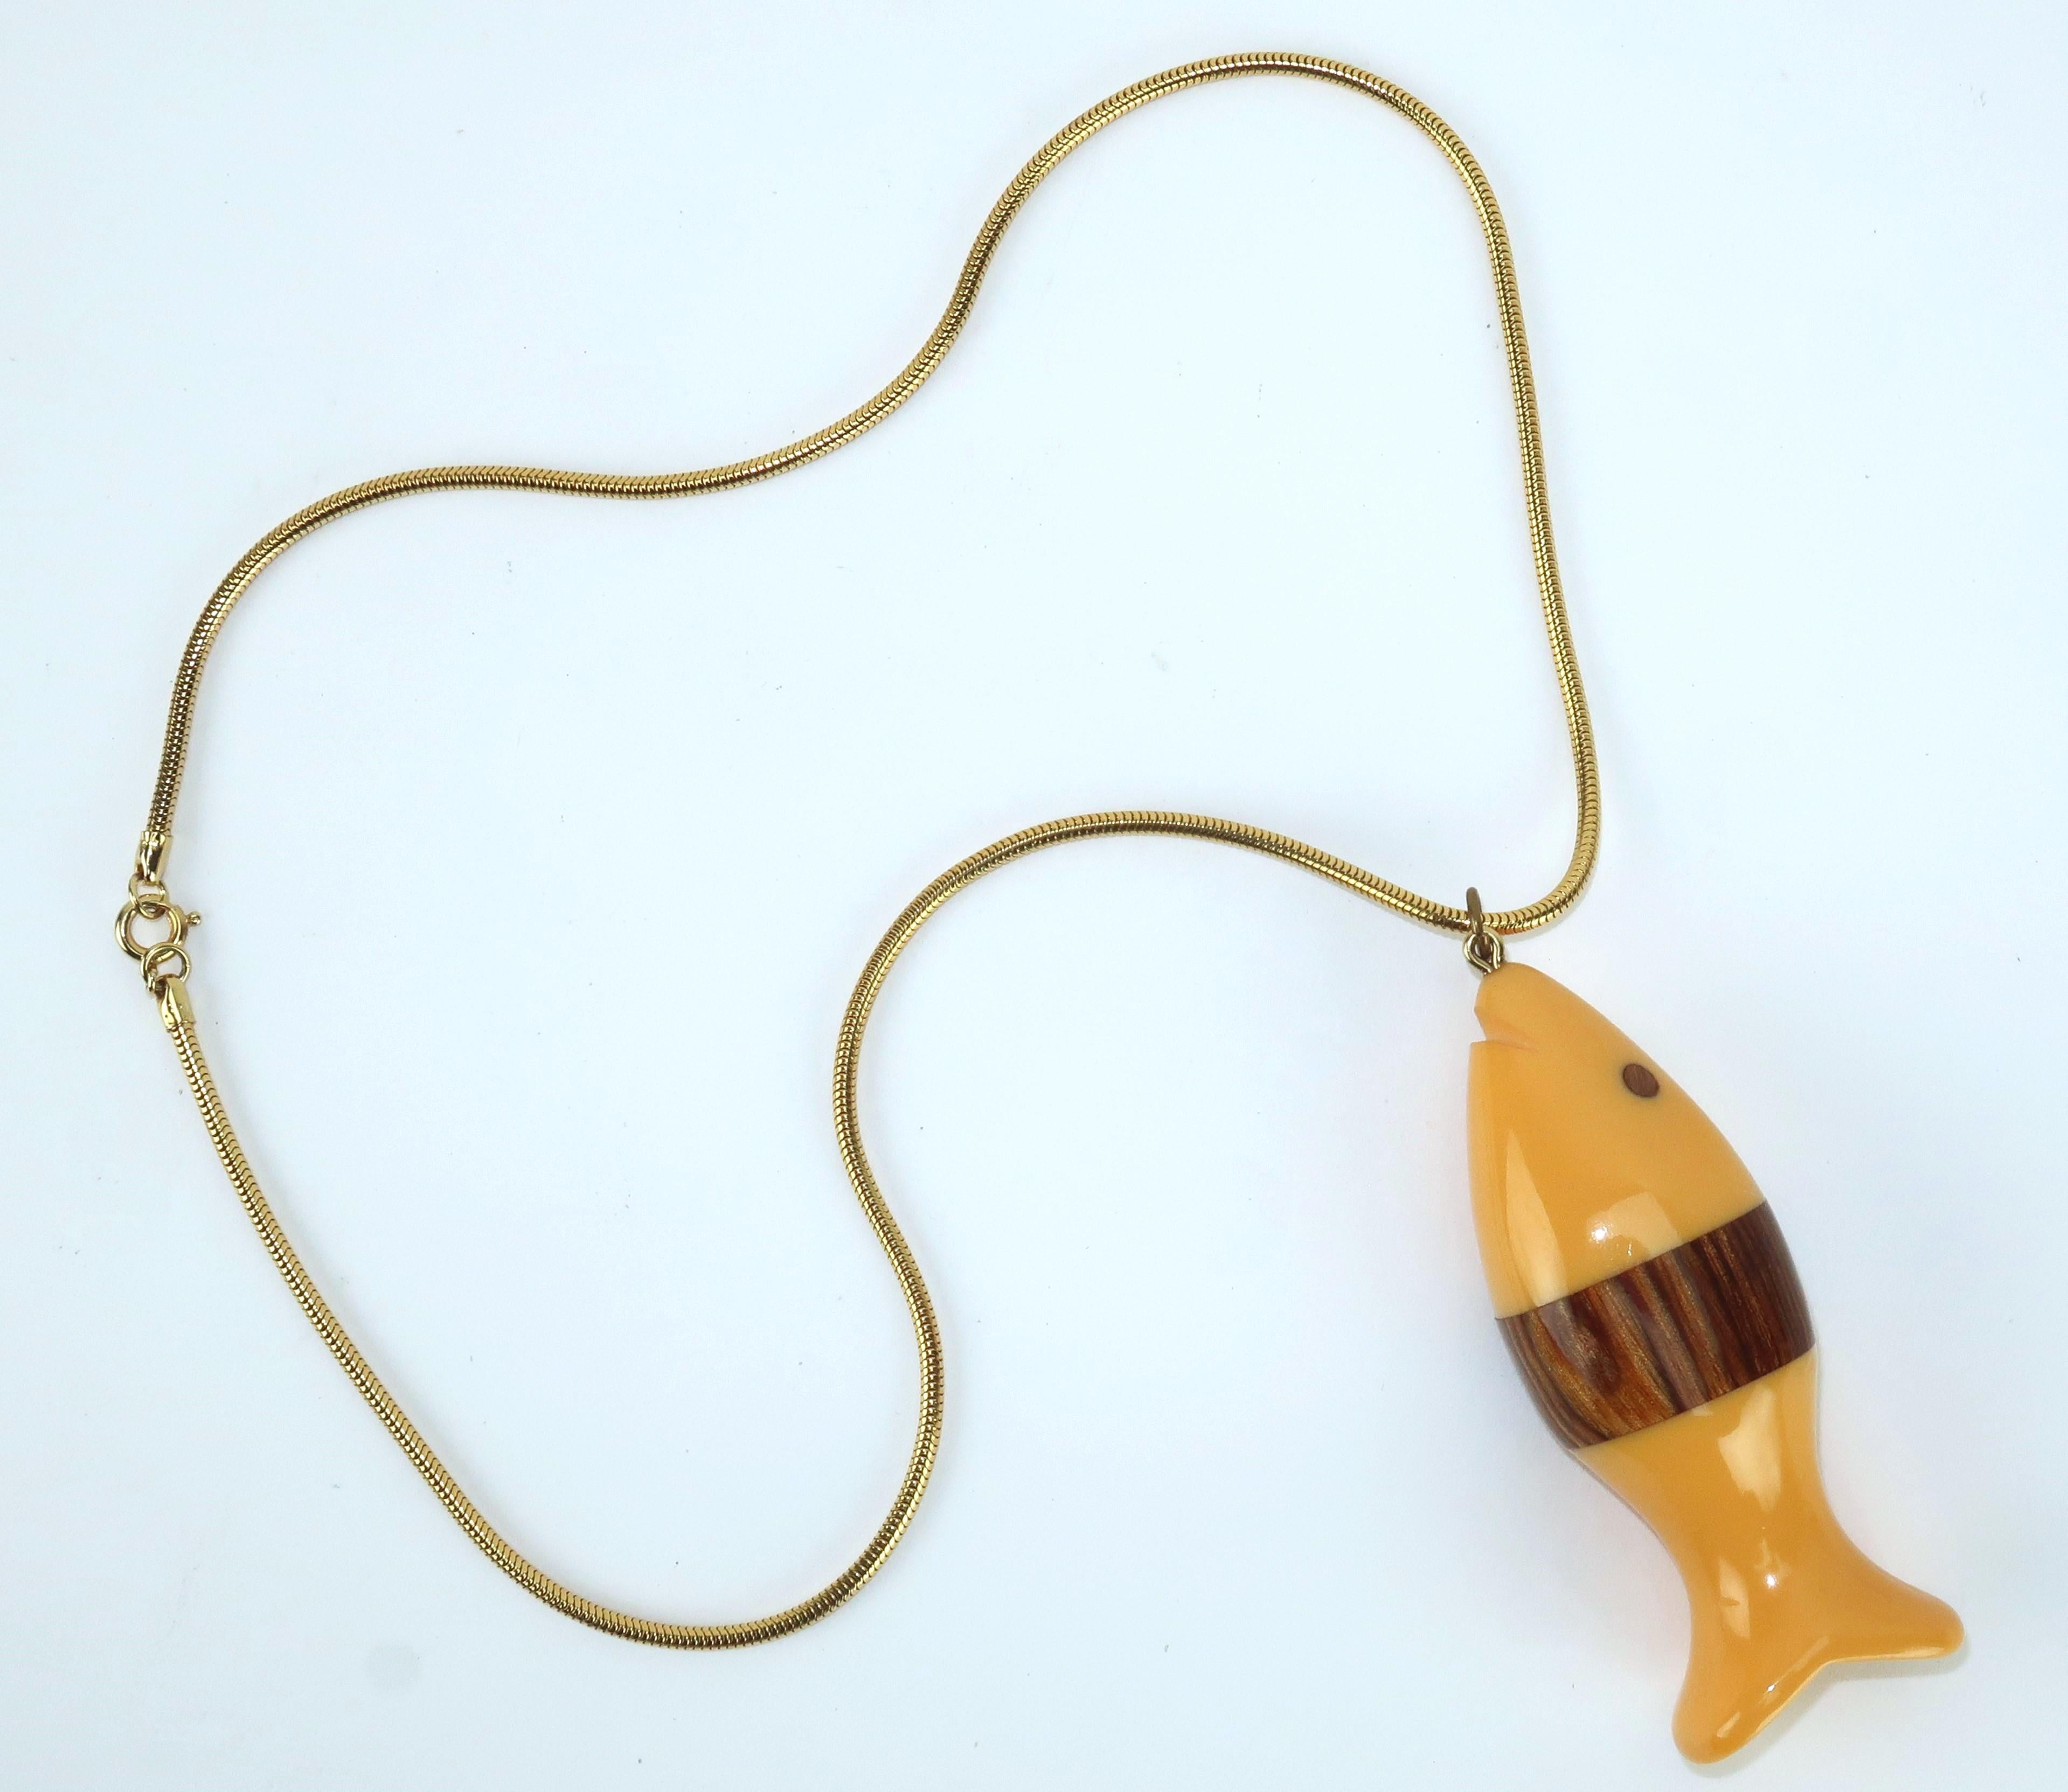 This little guy is quite a catch!  1960's bakelite fish pendant with wood accents suspended from a gold tone serpentine chain.  The chain is outfitted with a spring ring closure.  Don't let this one swim away!  Note:  this same pendant is pictured